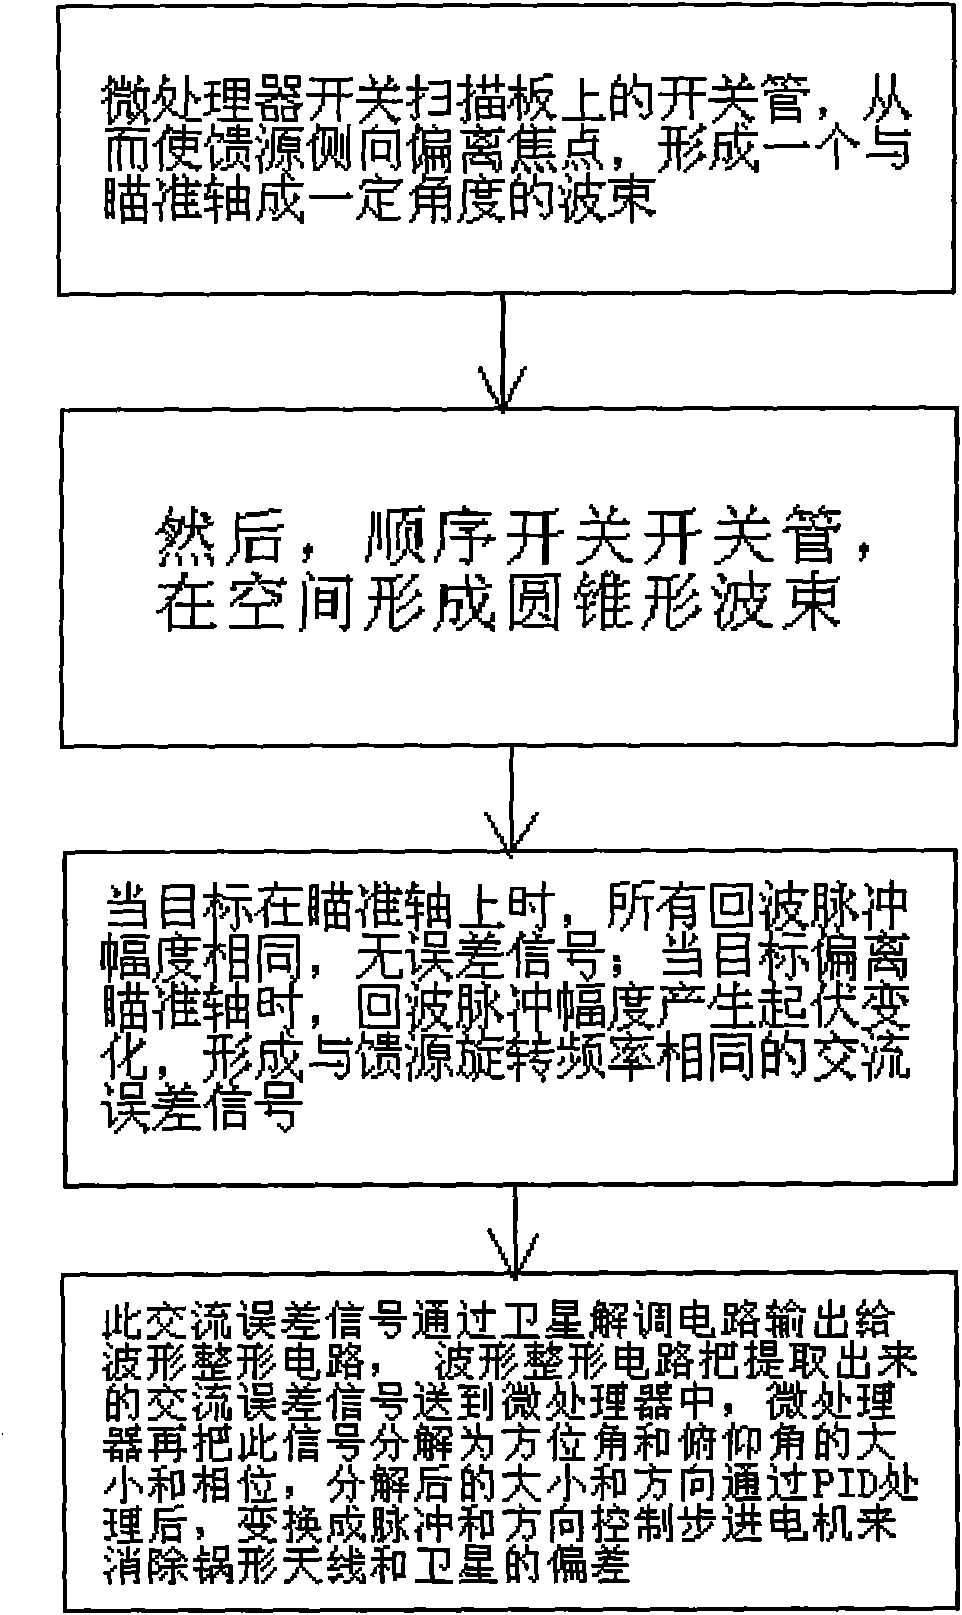 Method for controlling moving carrier satellite antenna receiving and tracking system